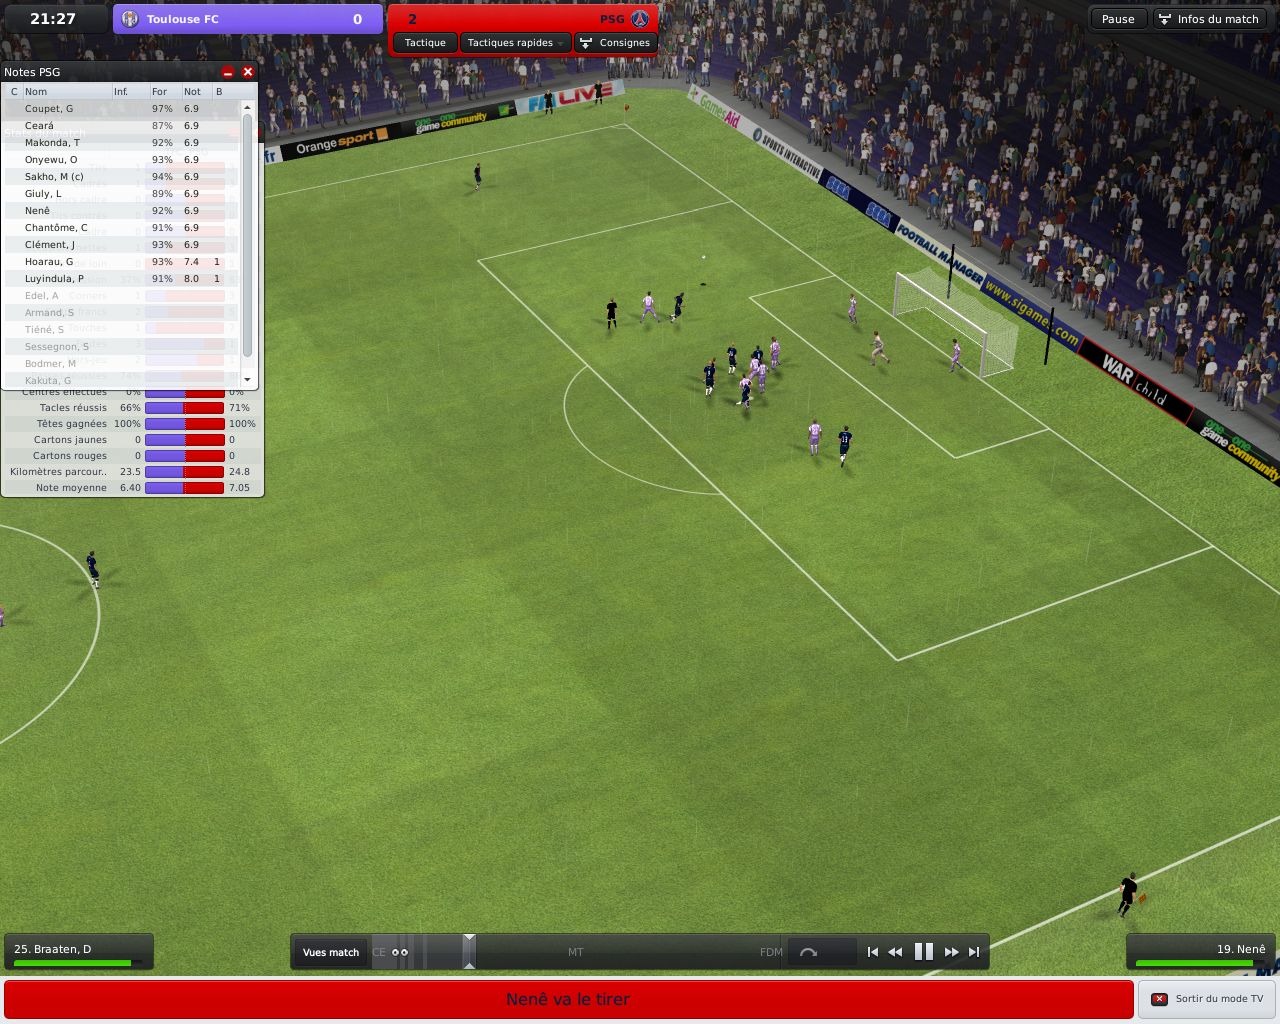 http://image.jeuxvideo.com/images/pc/f/o/football-manager-2011-pc-033.jpg